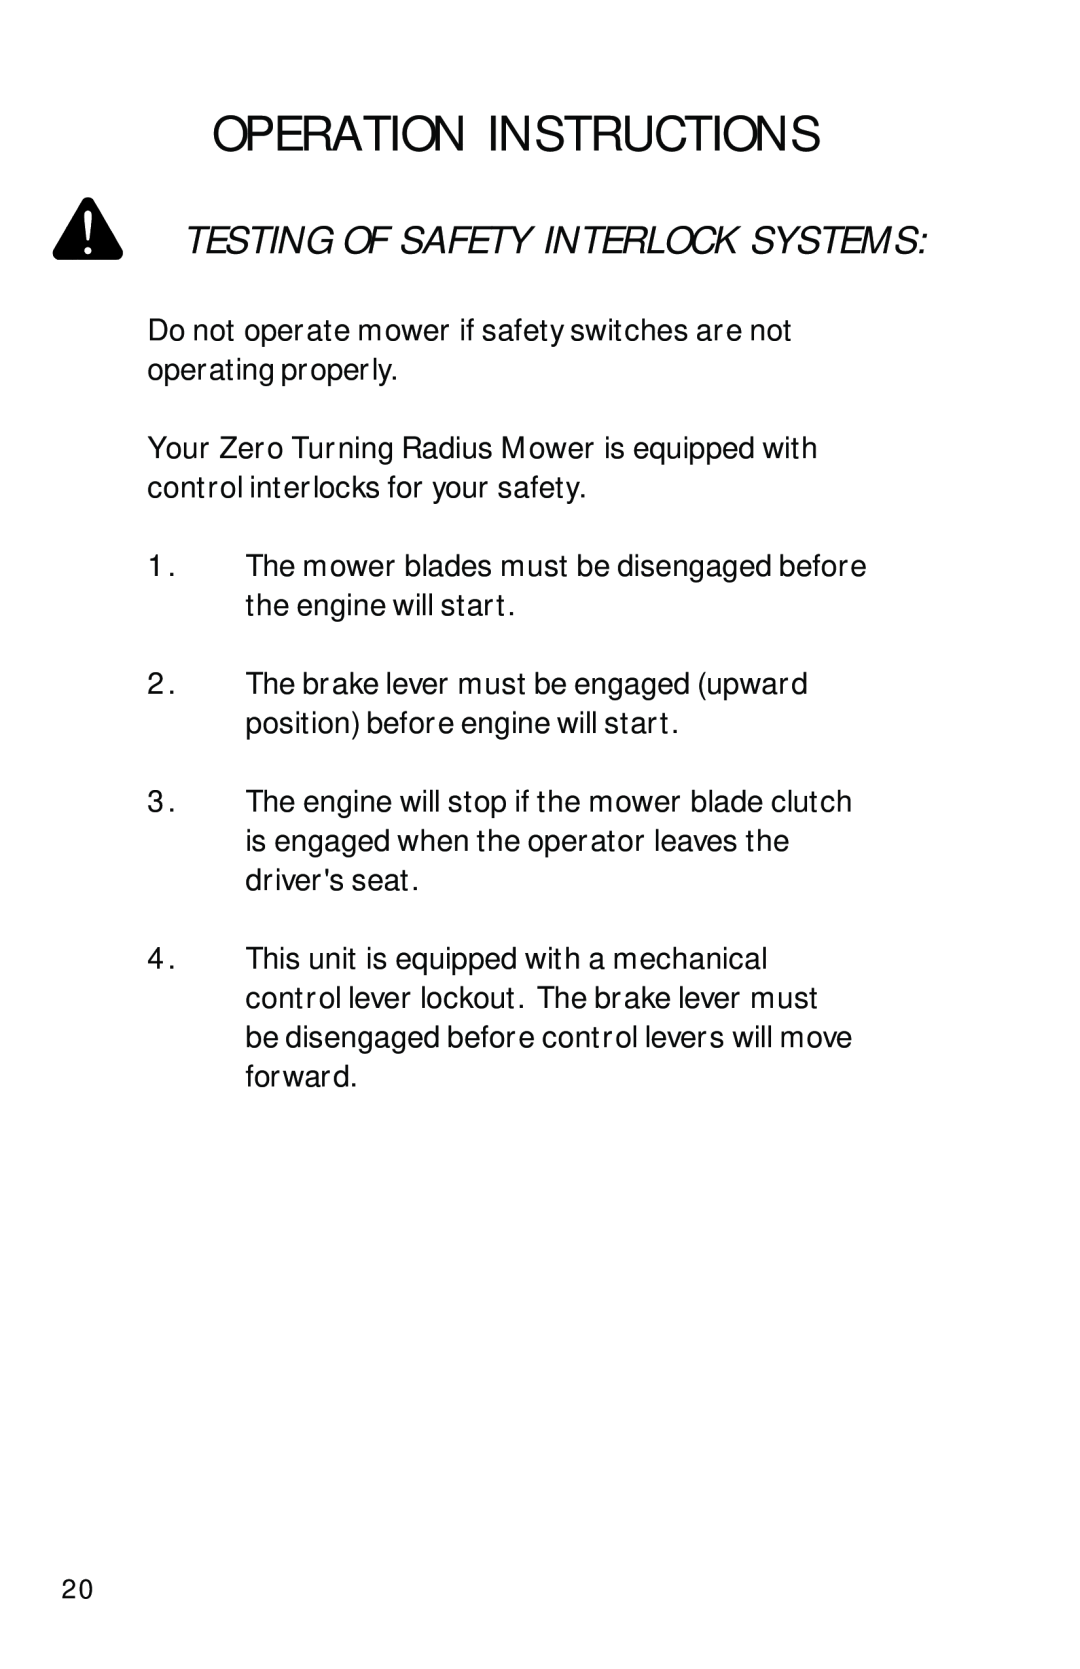 Dixon 7500 Series manual Testing Of Safety Interlock Systems, Operation Instructions 